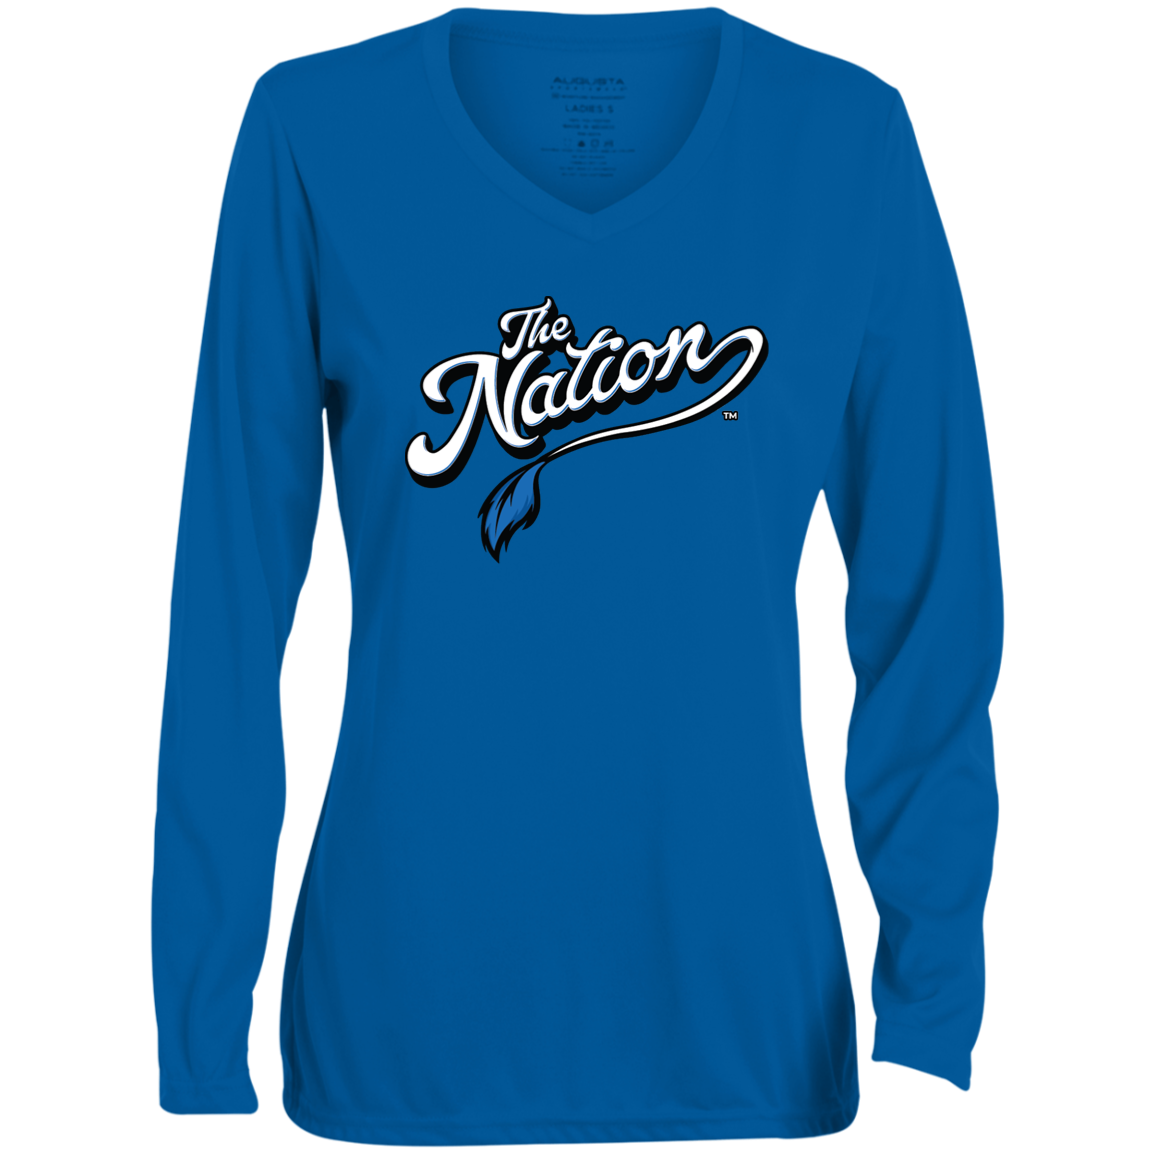 The Nation™ Ladies' Long Sleeve V-Neck Tee